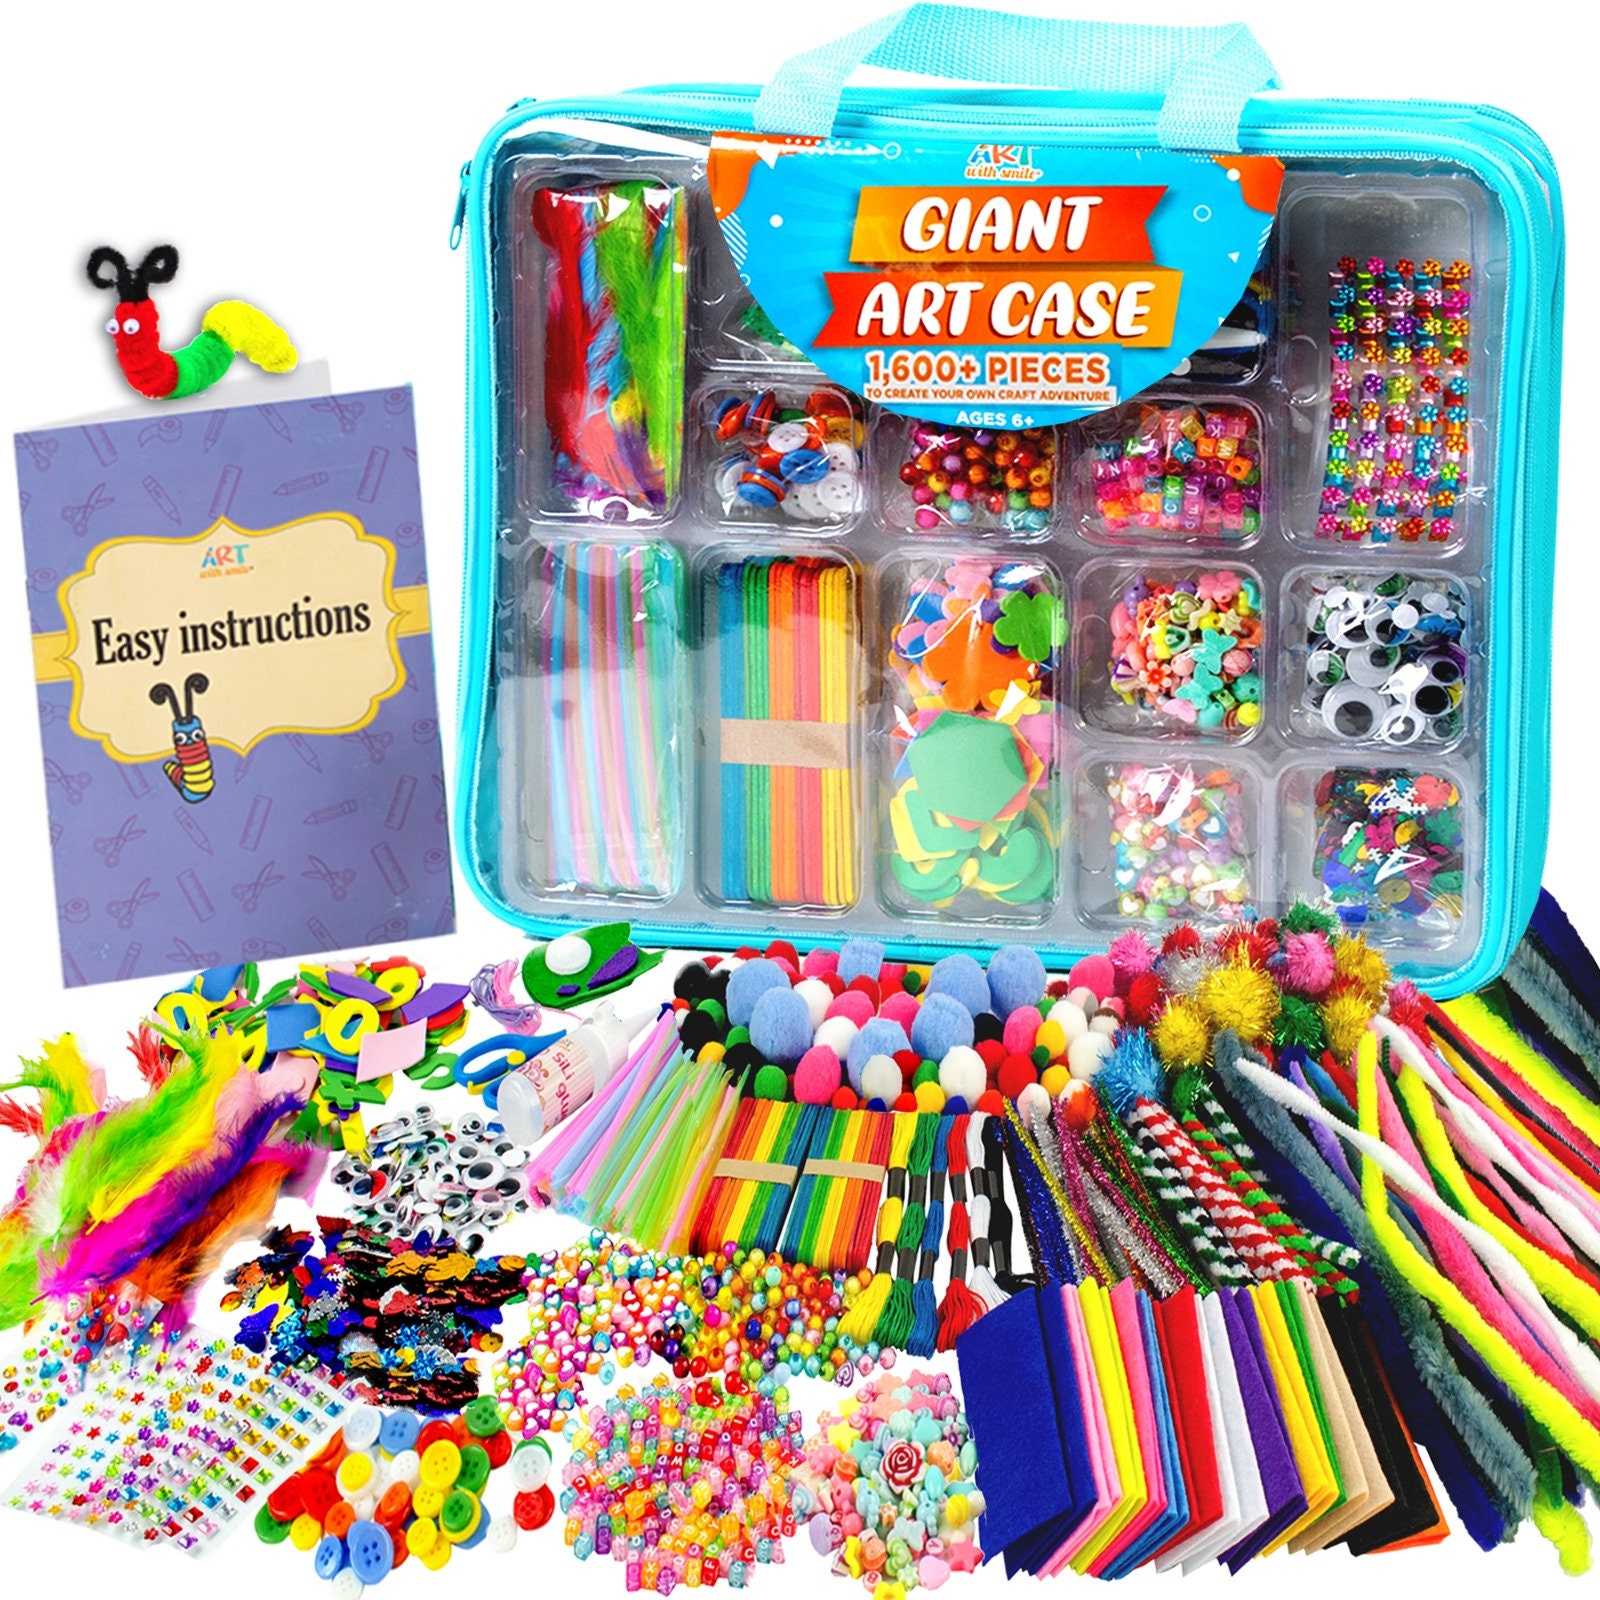  Drawing Kit Drawing Pencils Set Colored Pencils for Kids  Coloring Book Sketching Kit Best Teen Girl Gift - Arts and Crafts for Kids  Ages 8-12 Girls Boys : Arts, Crafts & Sewing